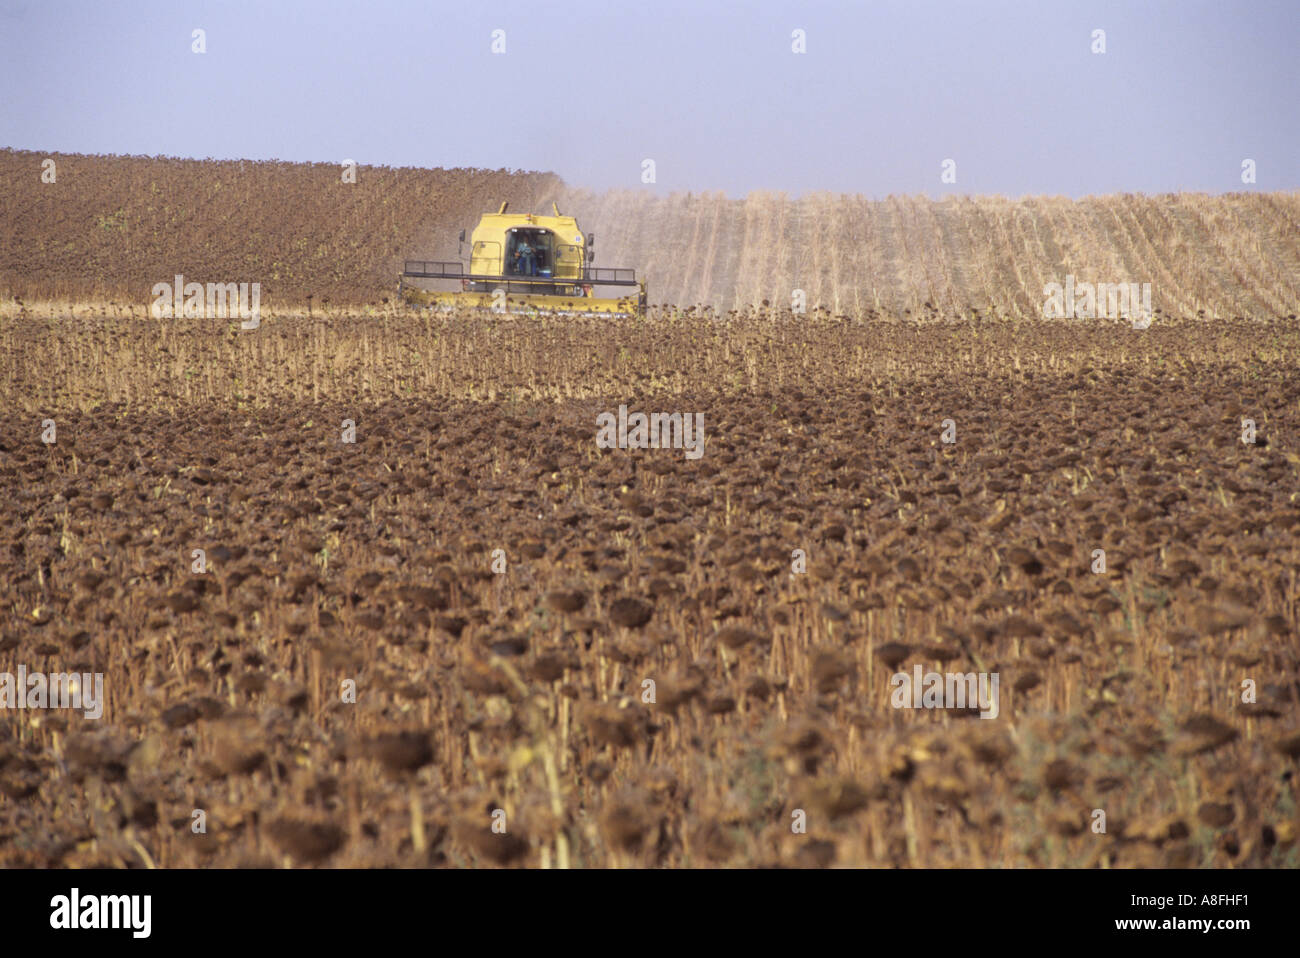 combine harvester harvesting sunflowers Andalusia Spain Stock Photo